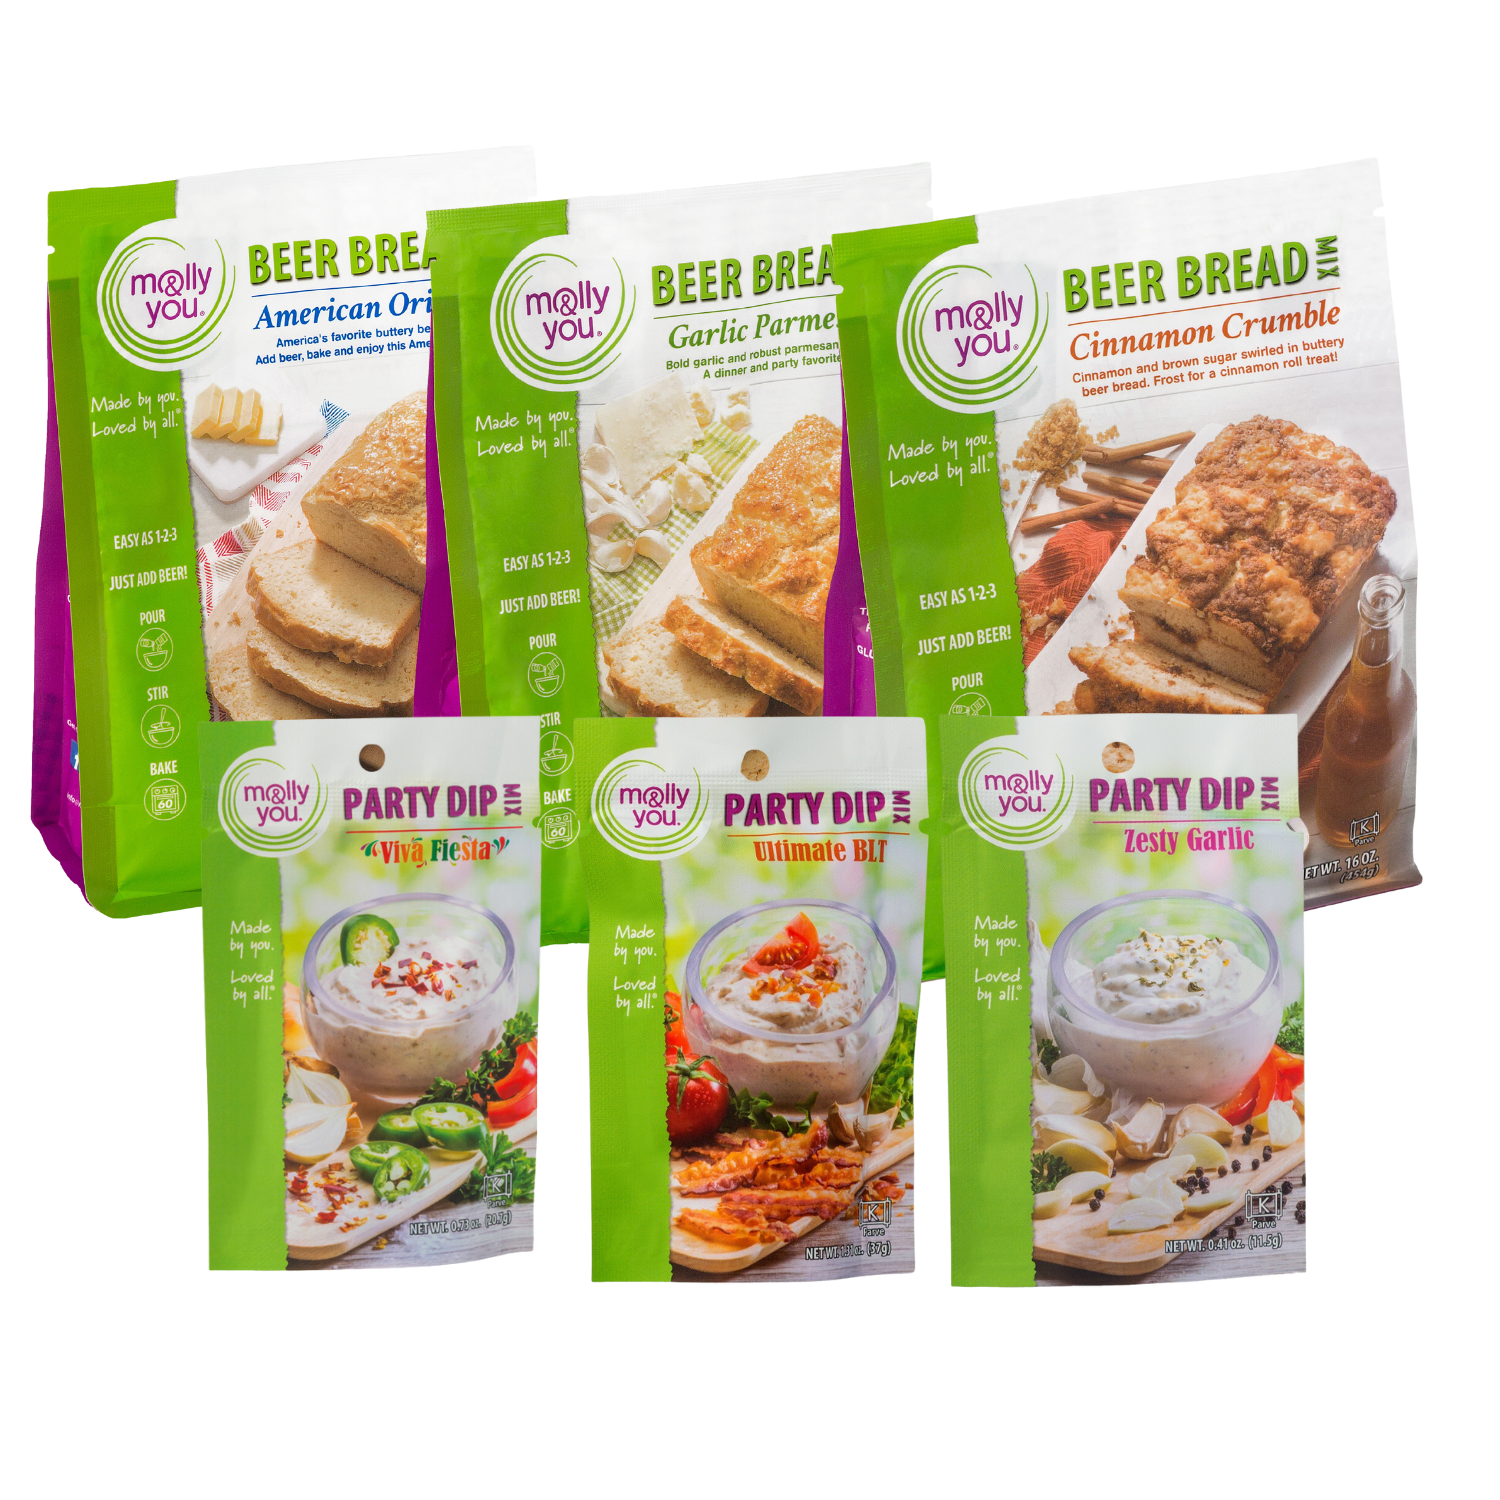 Top Trio Bundle of our top Beer Bread Mixes and Party Dip Mixes - American Original, Garlic Parmesan, Cinnamon Crumble Beer Bread Mix and Viva Fiesta, Ultimate BLT, and zesty Garlic Party Dip Mix